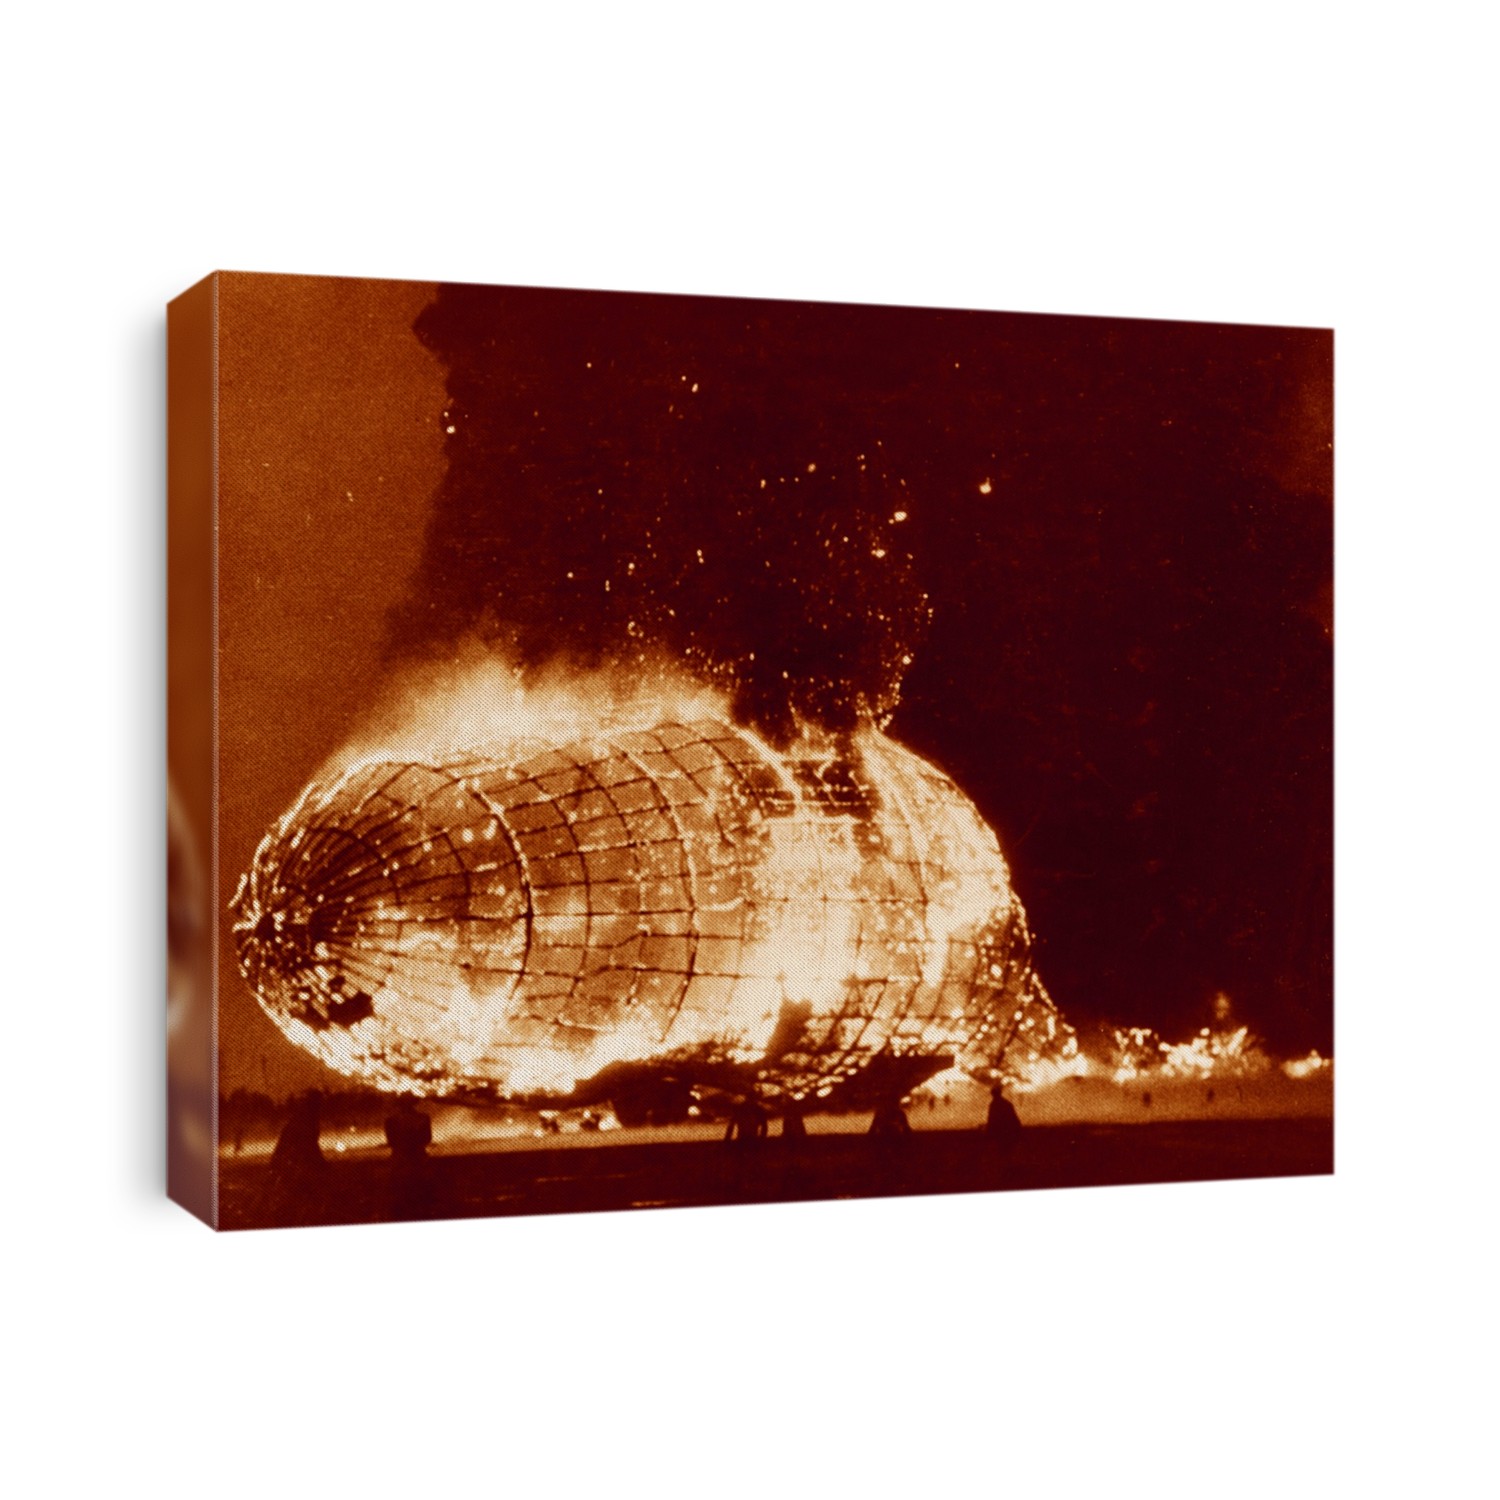 Hindenburg disaster, coloured image. Bow of the German airship Hindenburg (LZ 129) on fire after crashing at Naval Air Station (NAS) Lakehurst, New Jersey, USA, on 6th May 1937. This airship is famous for the Hindenburg disaster of 6th May 1937, when it caught fire and was destroyed during its attempt to dock with its mooring mast at NAS Lakehurst. Of the 97 crew and passengers on board 35 were killed, along with one member of the ground crew. The balloon was filled with hydrogen, a highly flammable gas. The cause of the accident has never been established but the disaster destroyed public confidence and marked the abrupt end of the airship era.